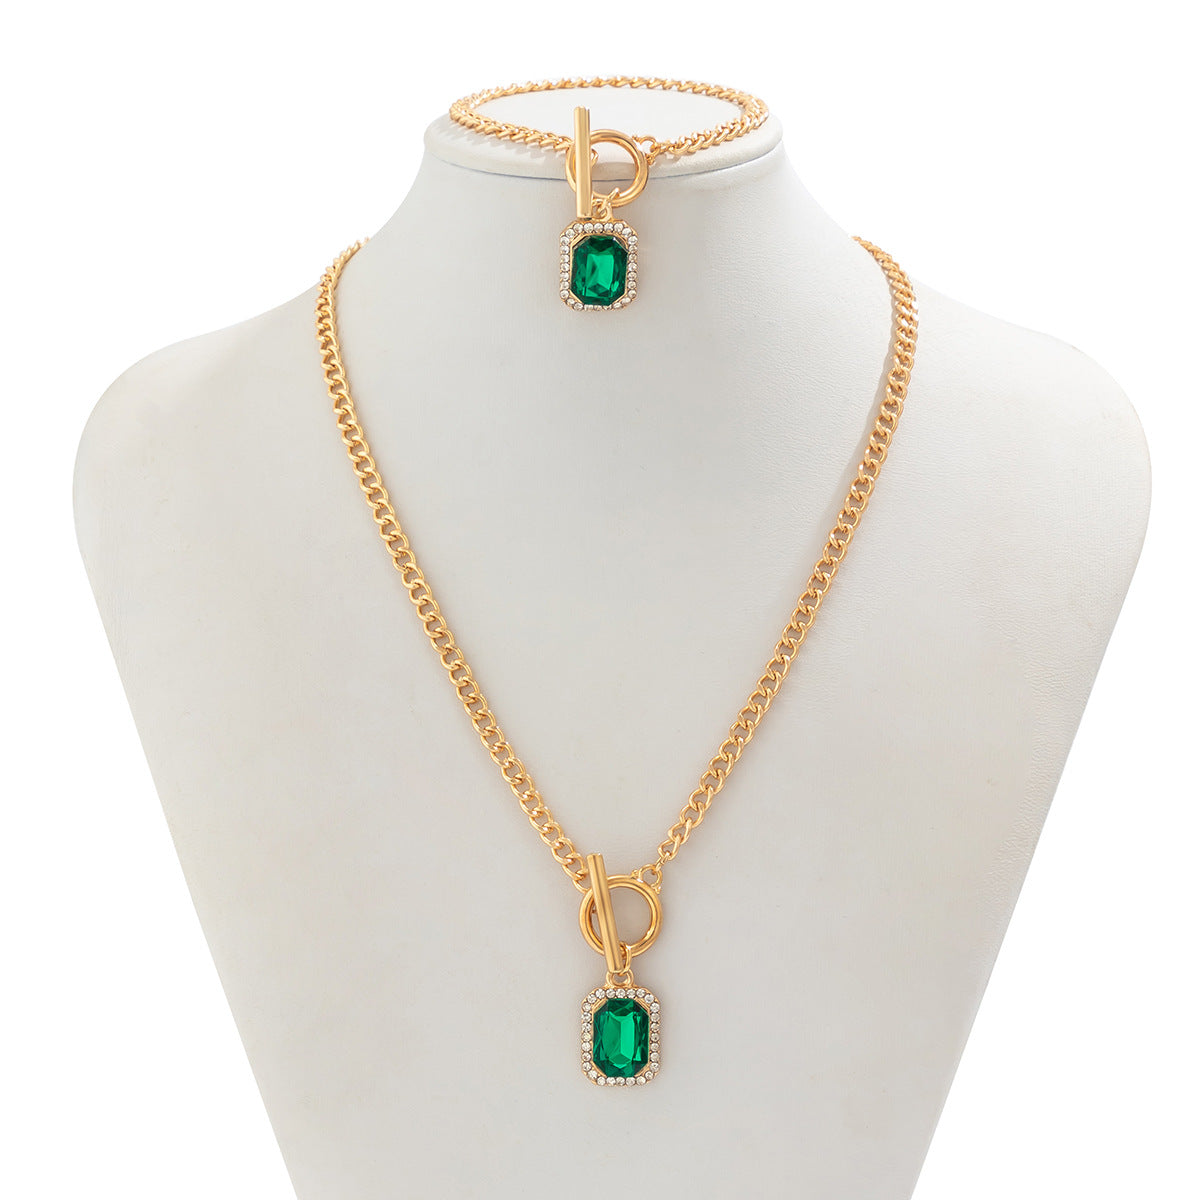 Green Gemstone Cross-border Necklace with Rhinestones from Europe and America